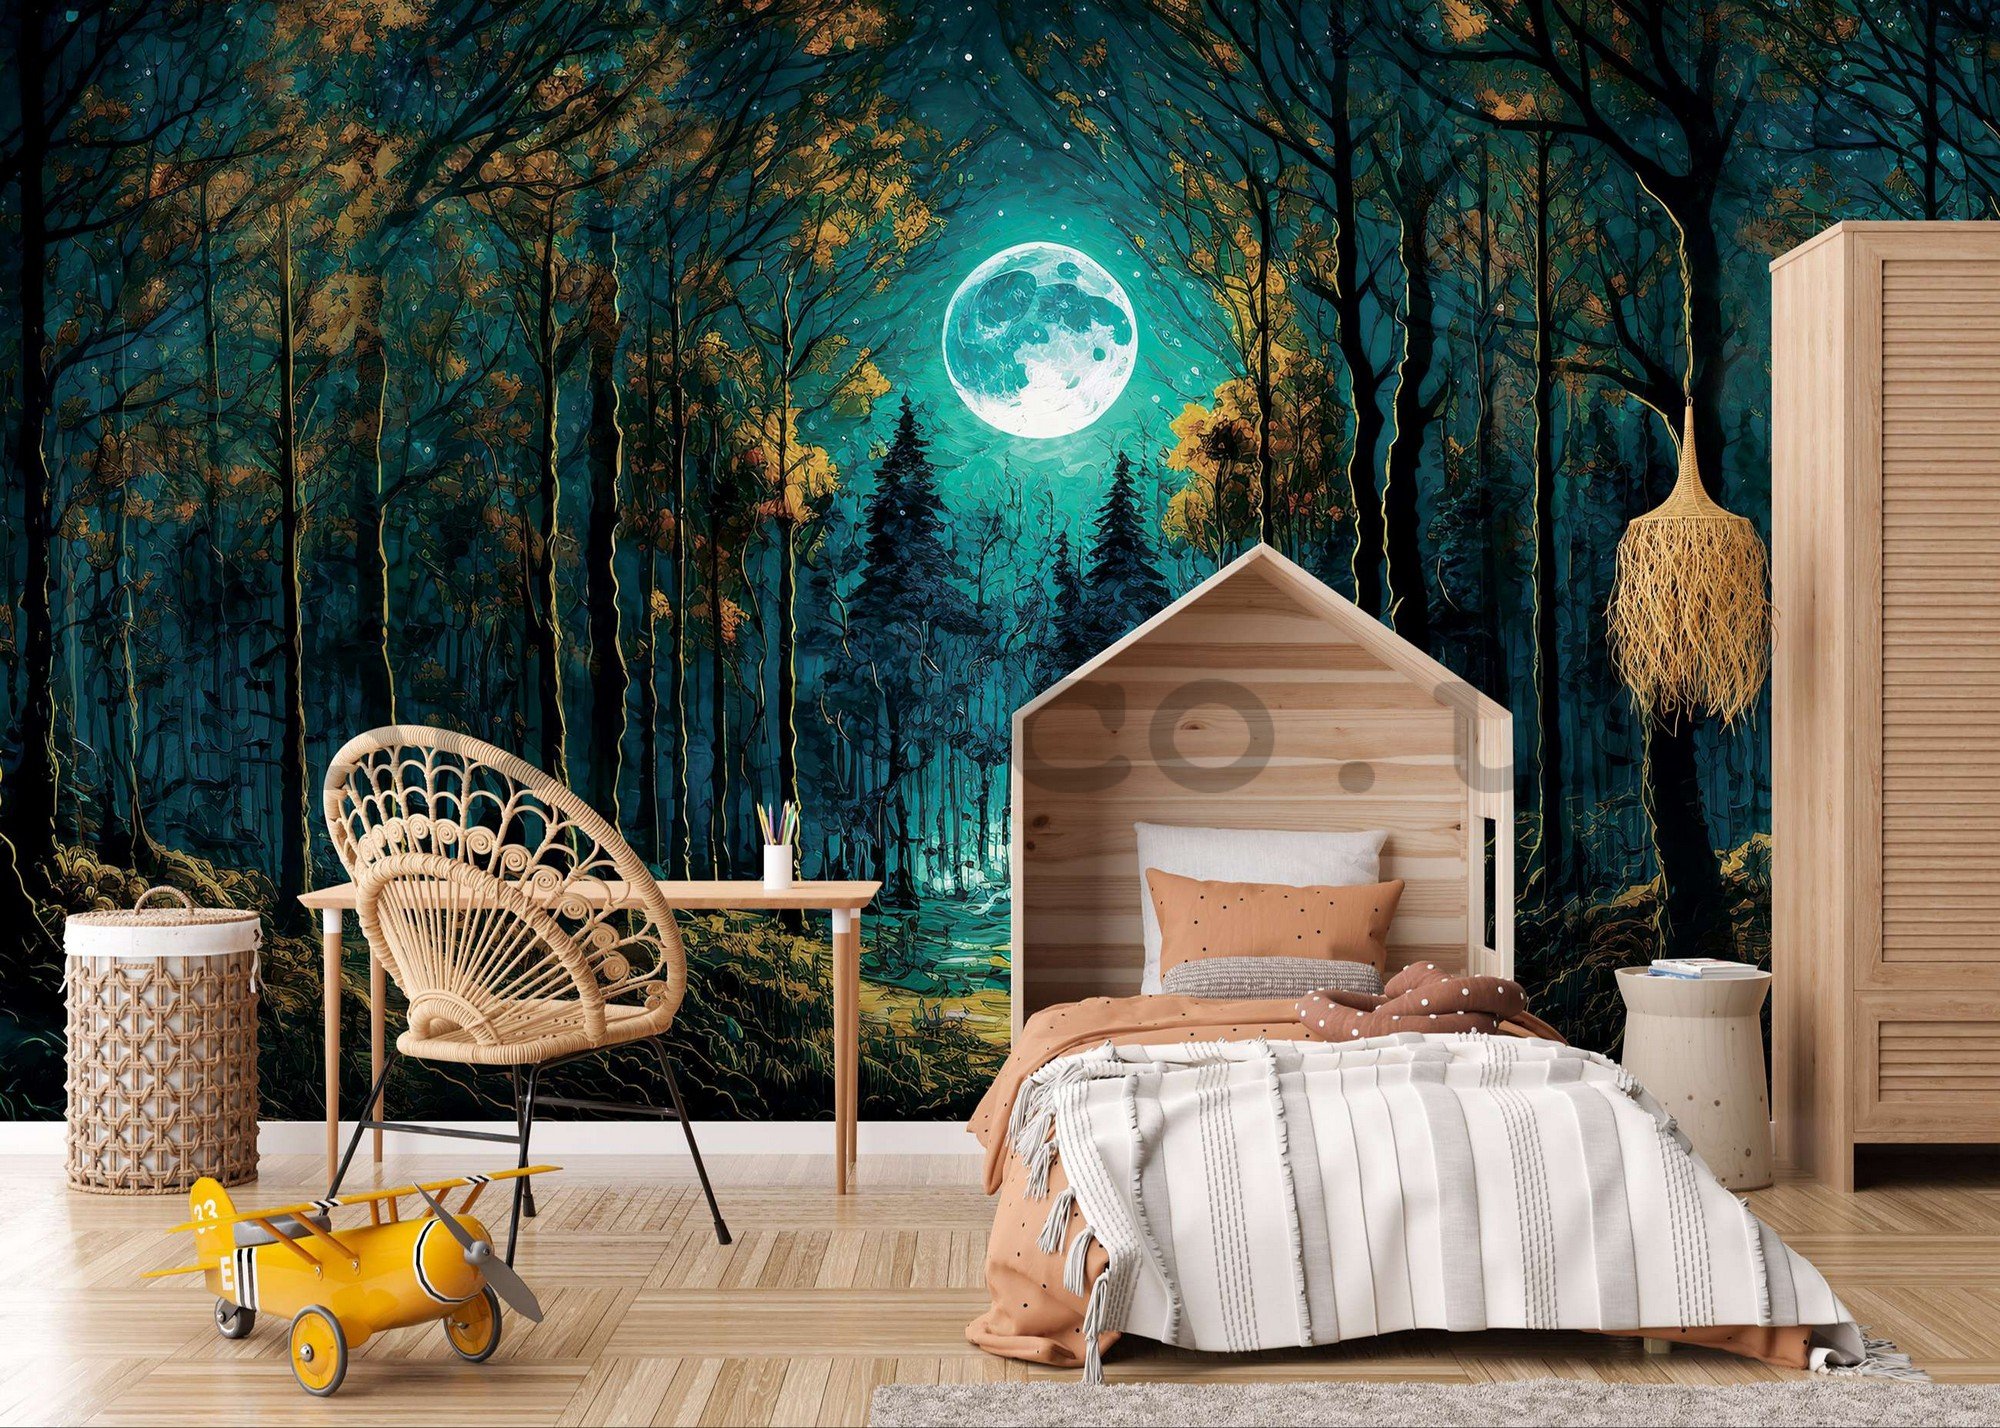 Wall mural vlies: Full moon in the forest - 416x254 cm